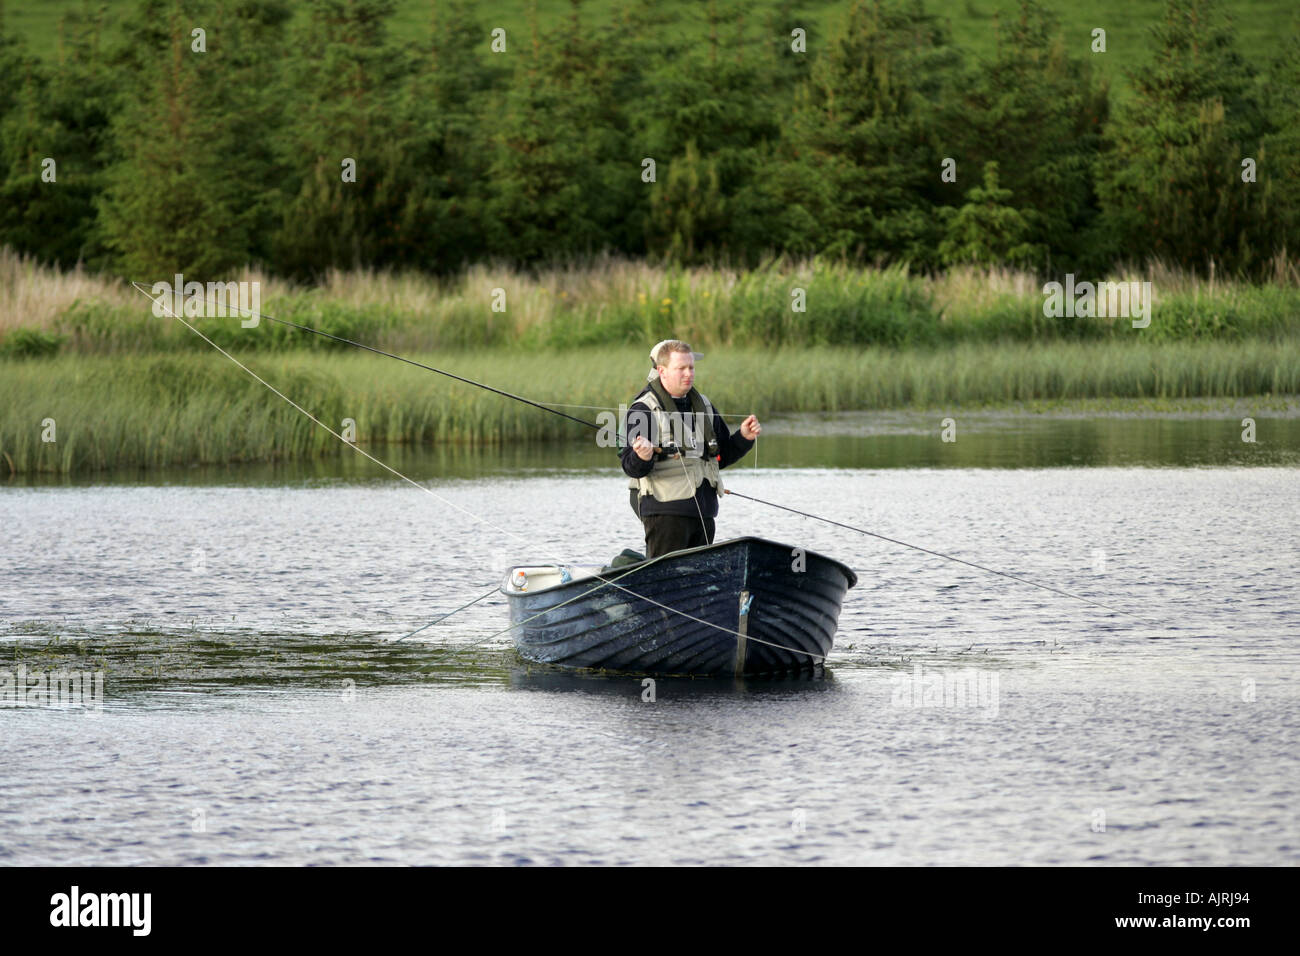 Fly fishing for lake trout from a boat Tildarg fishery county antrim northern ireland Stock Photo